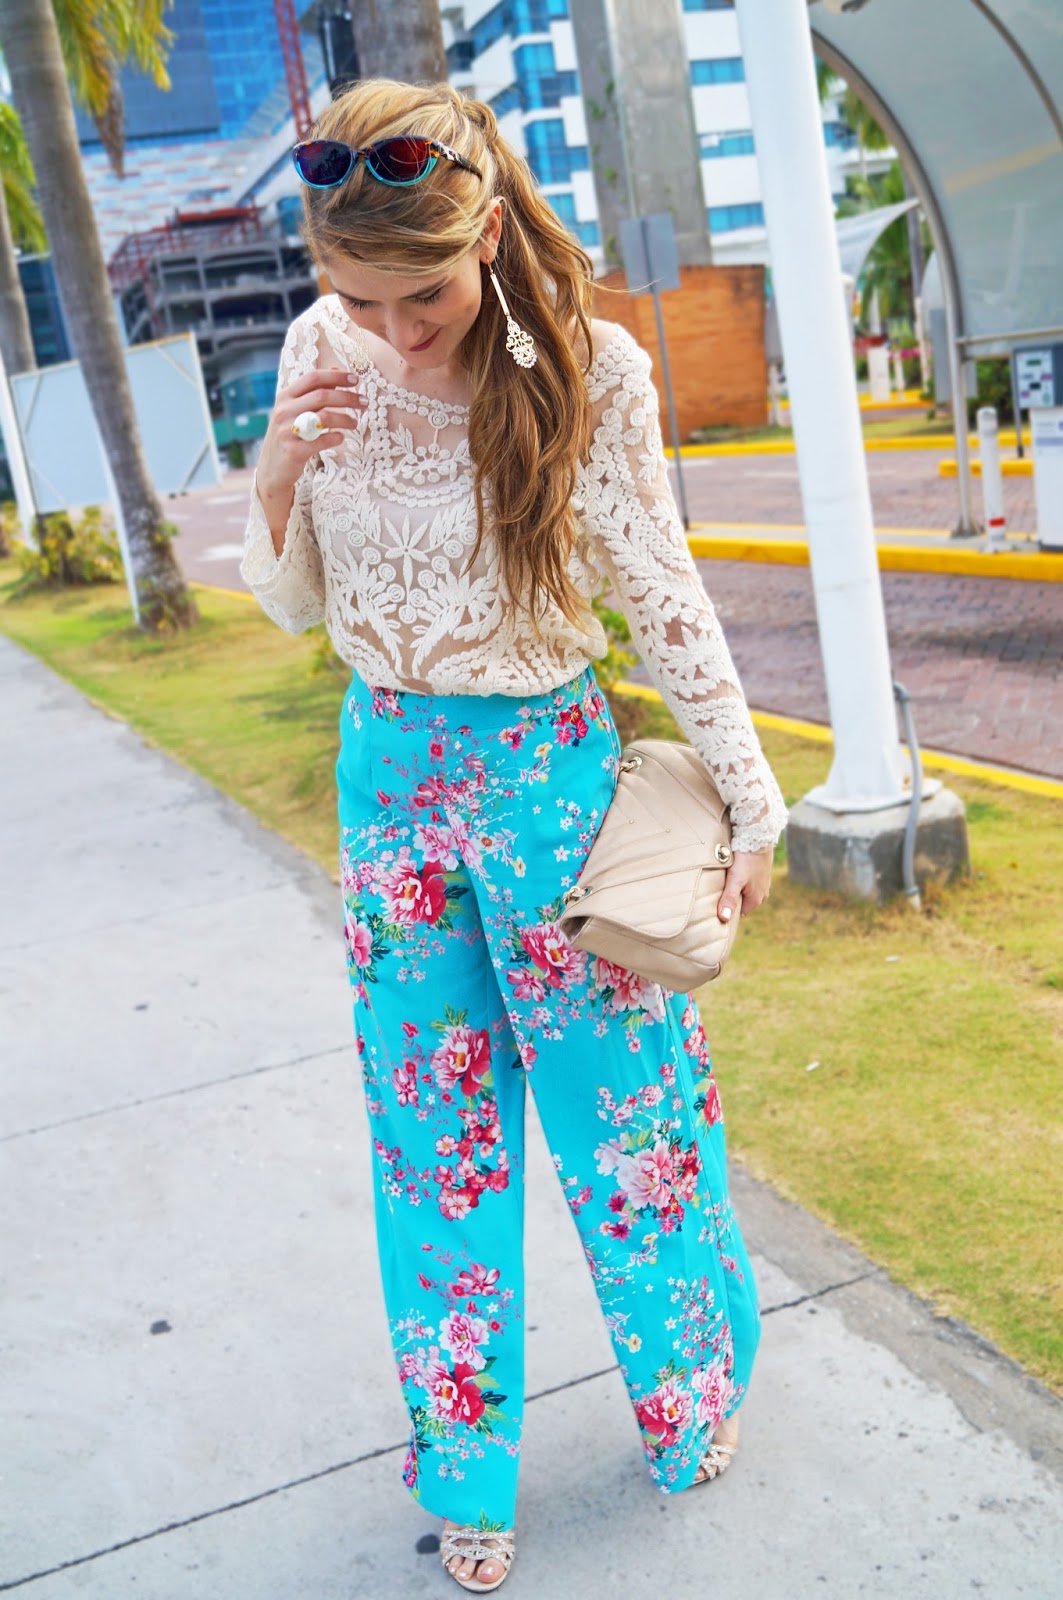 Pair different floral prints for Spring!